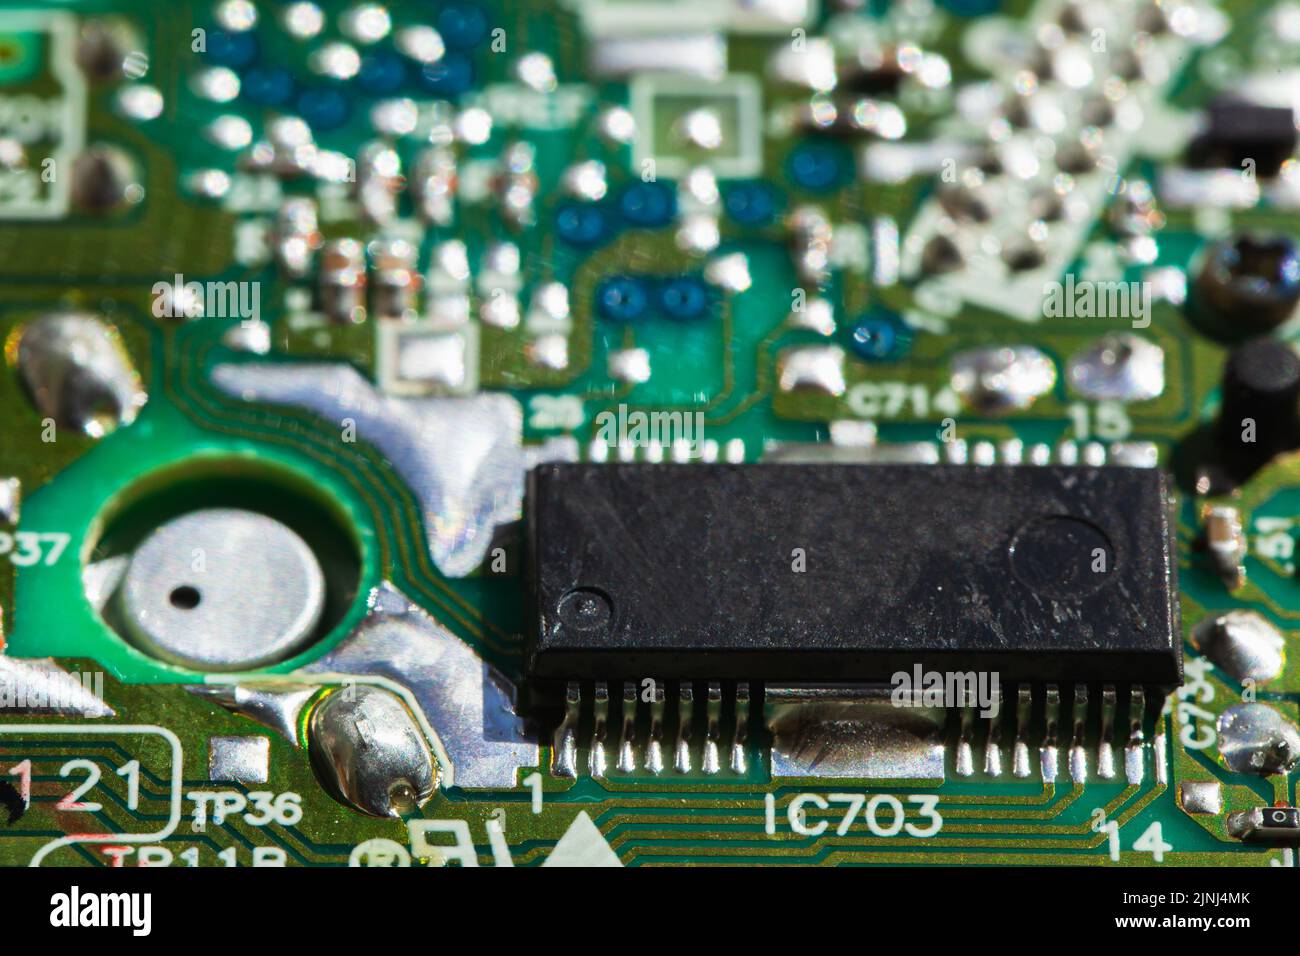 Chip and capacitors mounted on a green printed circuit board, close up photo with selective focus Stock Photo